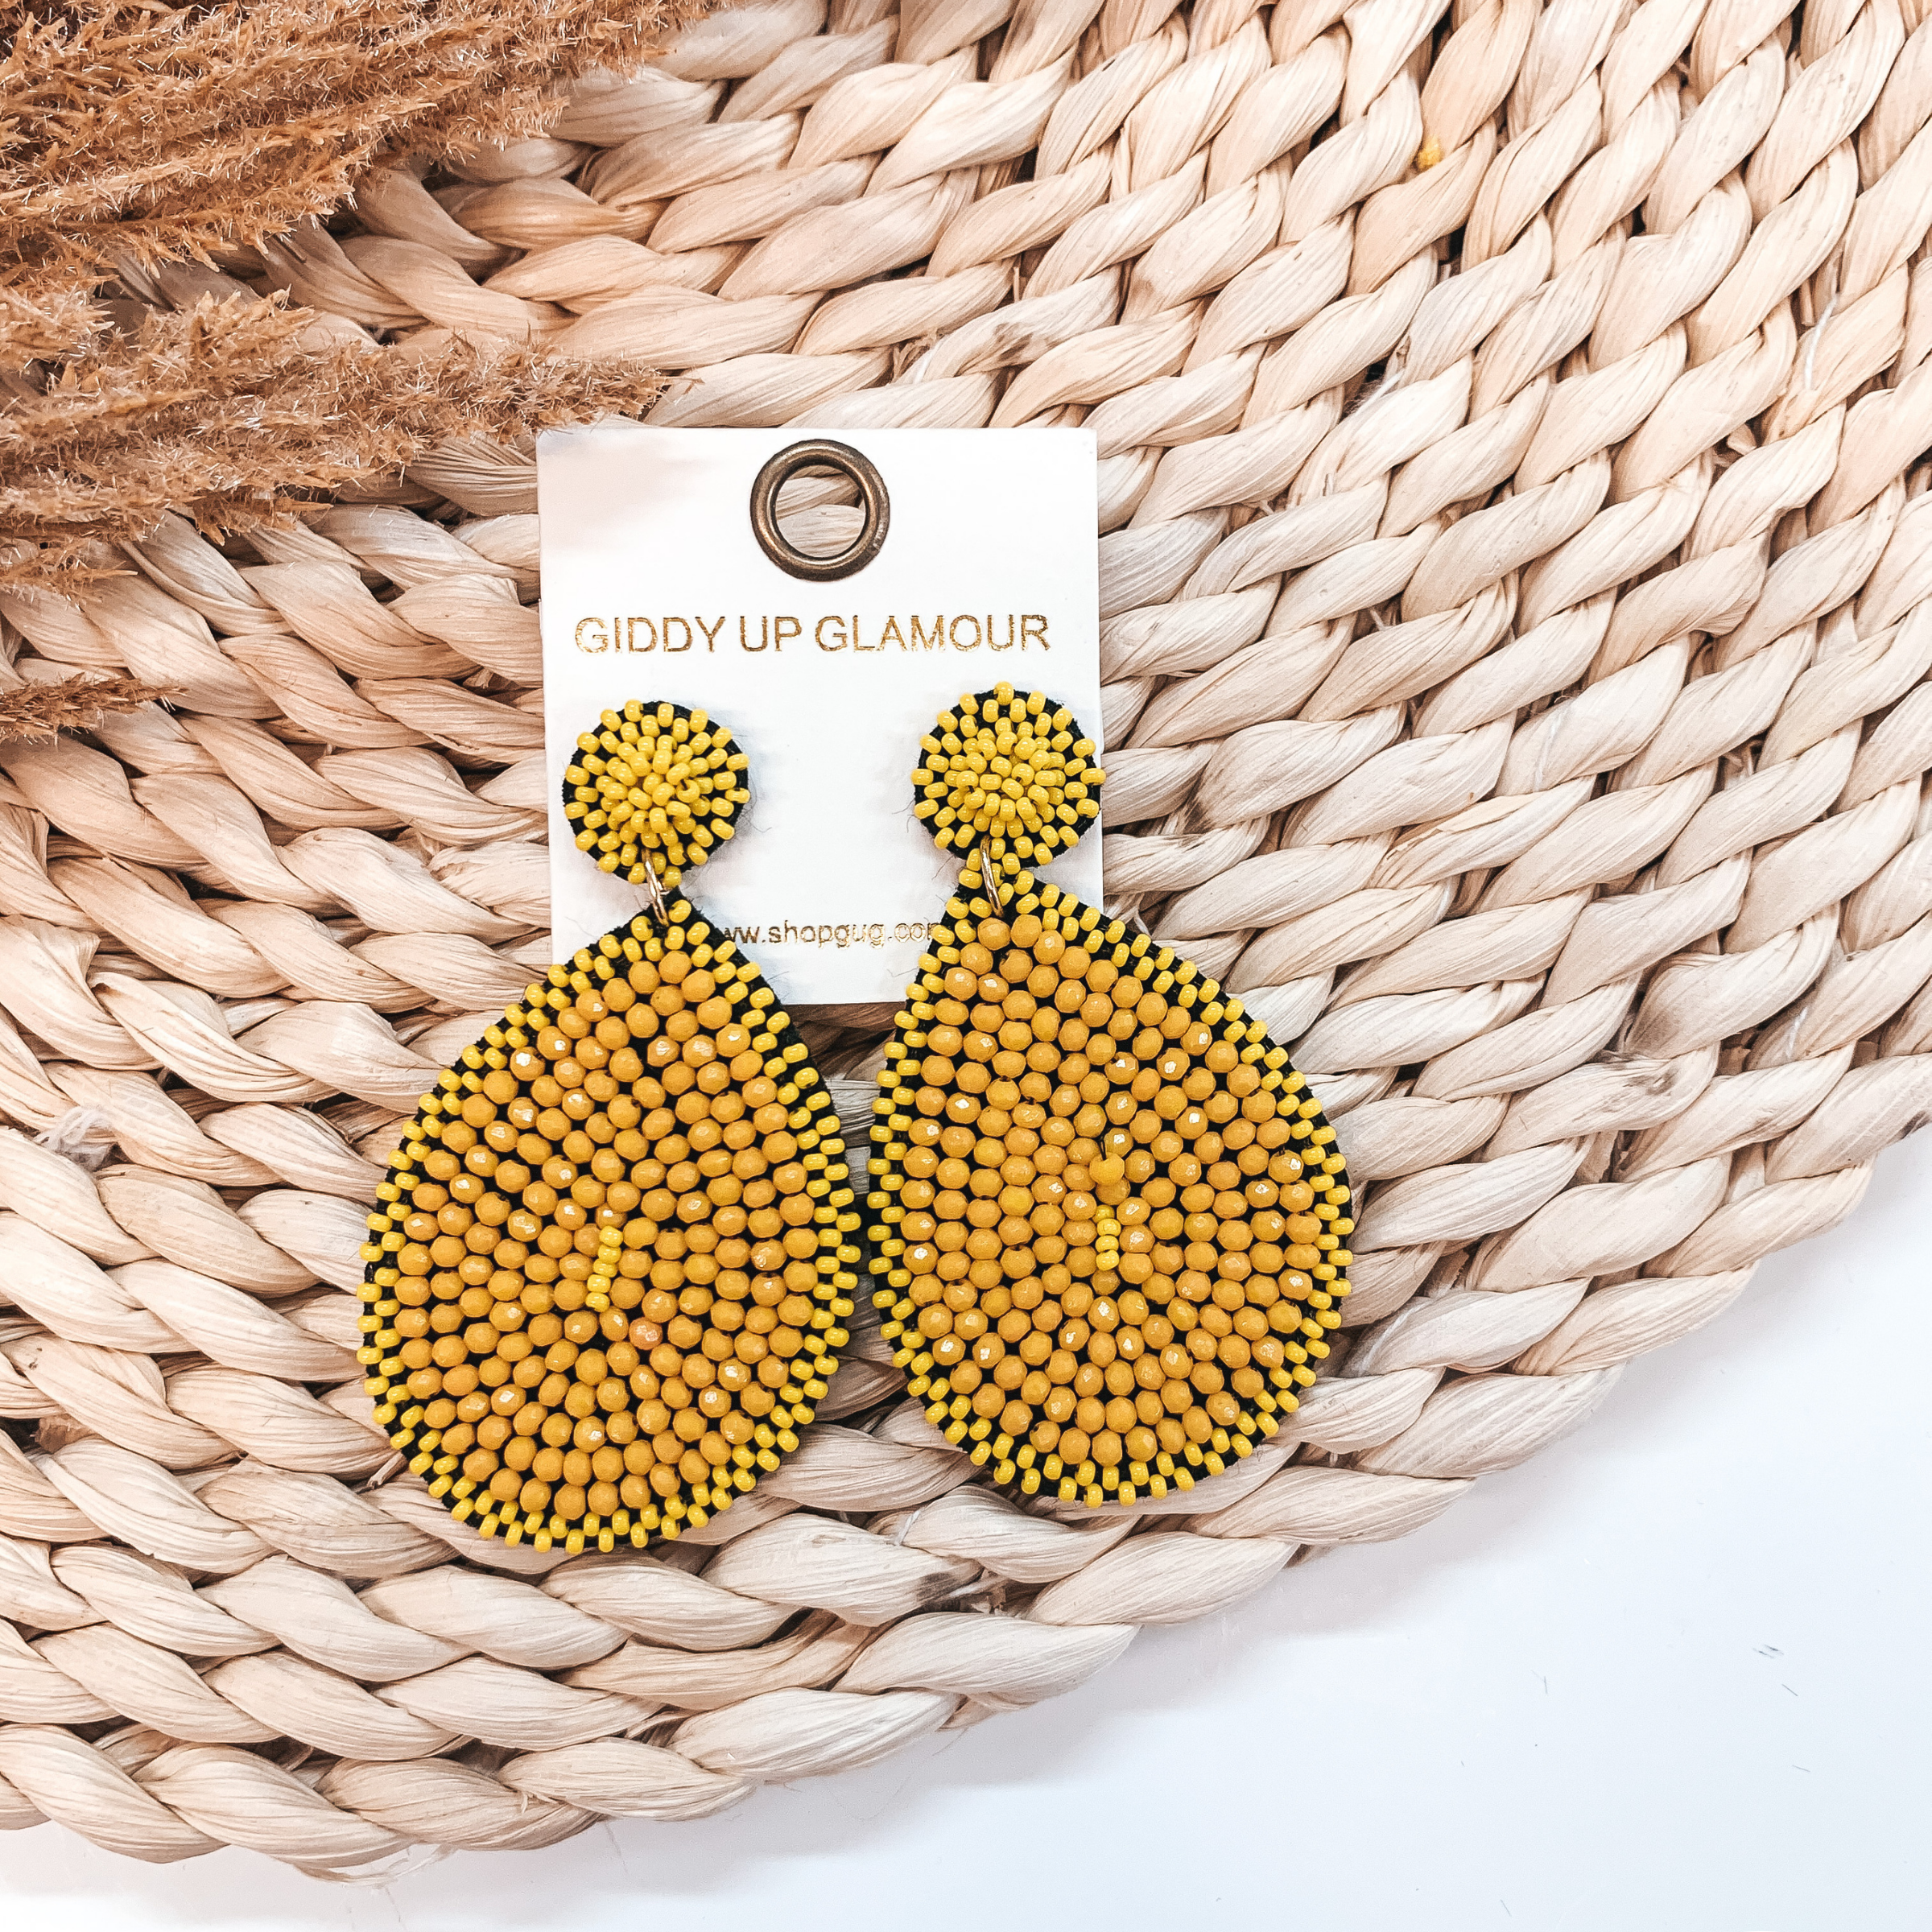 Crystal Beaded Circle Post Earrings with Large Teardrop Dangle in Yellow - Giddy Up Glamour Boutique